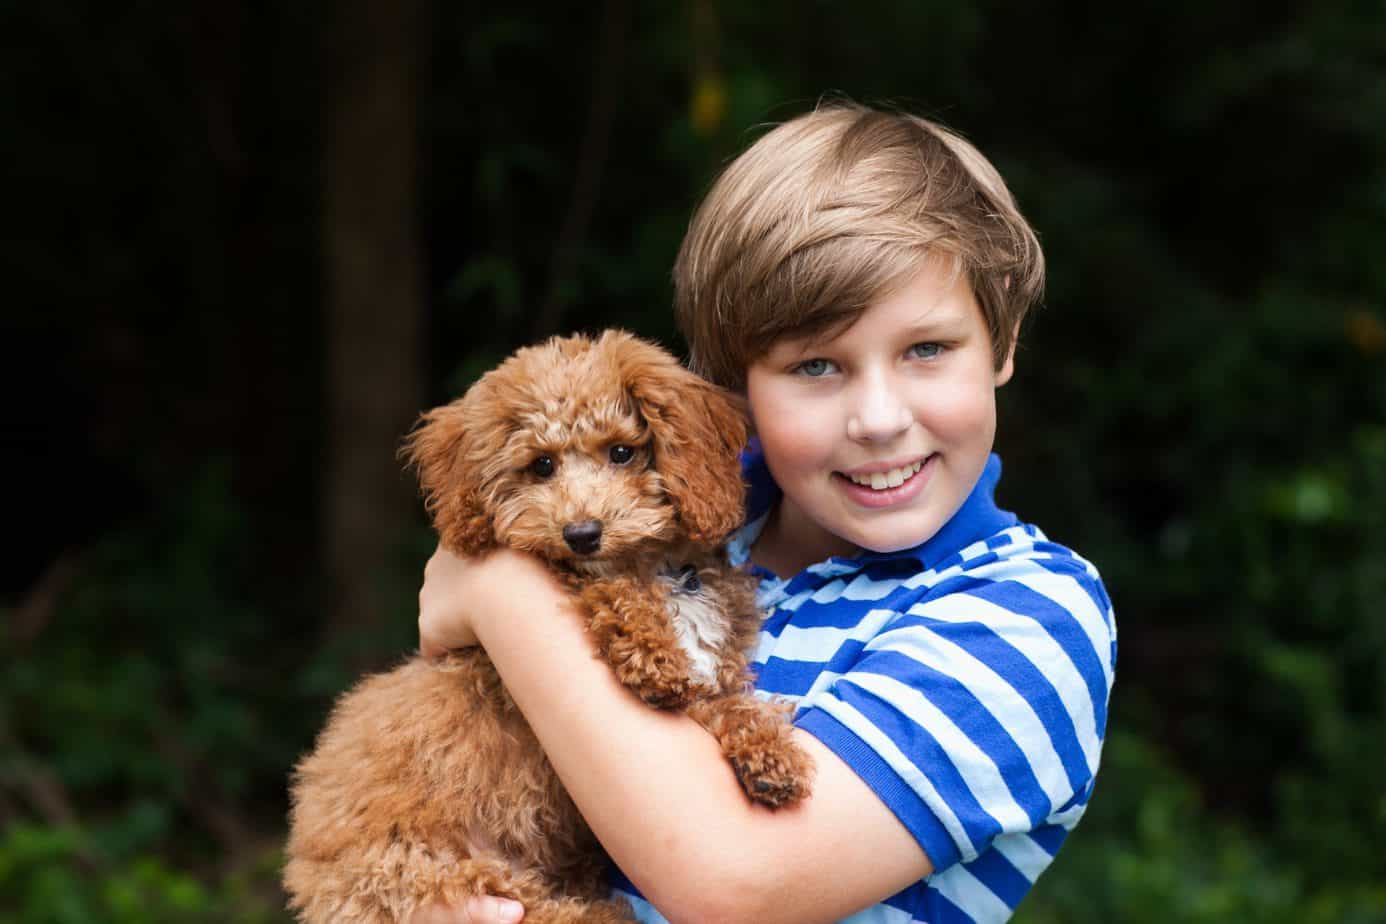 Boy hugs miniature poodle. Are poodles good with kids? Yes, their natural easy-going temperament makes them ideal companion animals. .